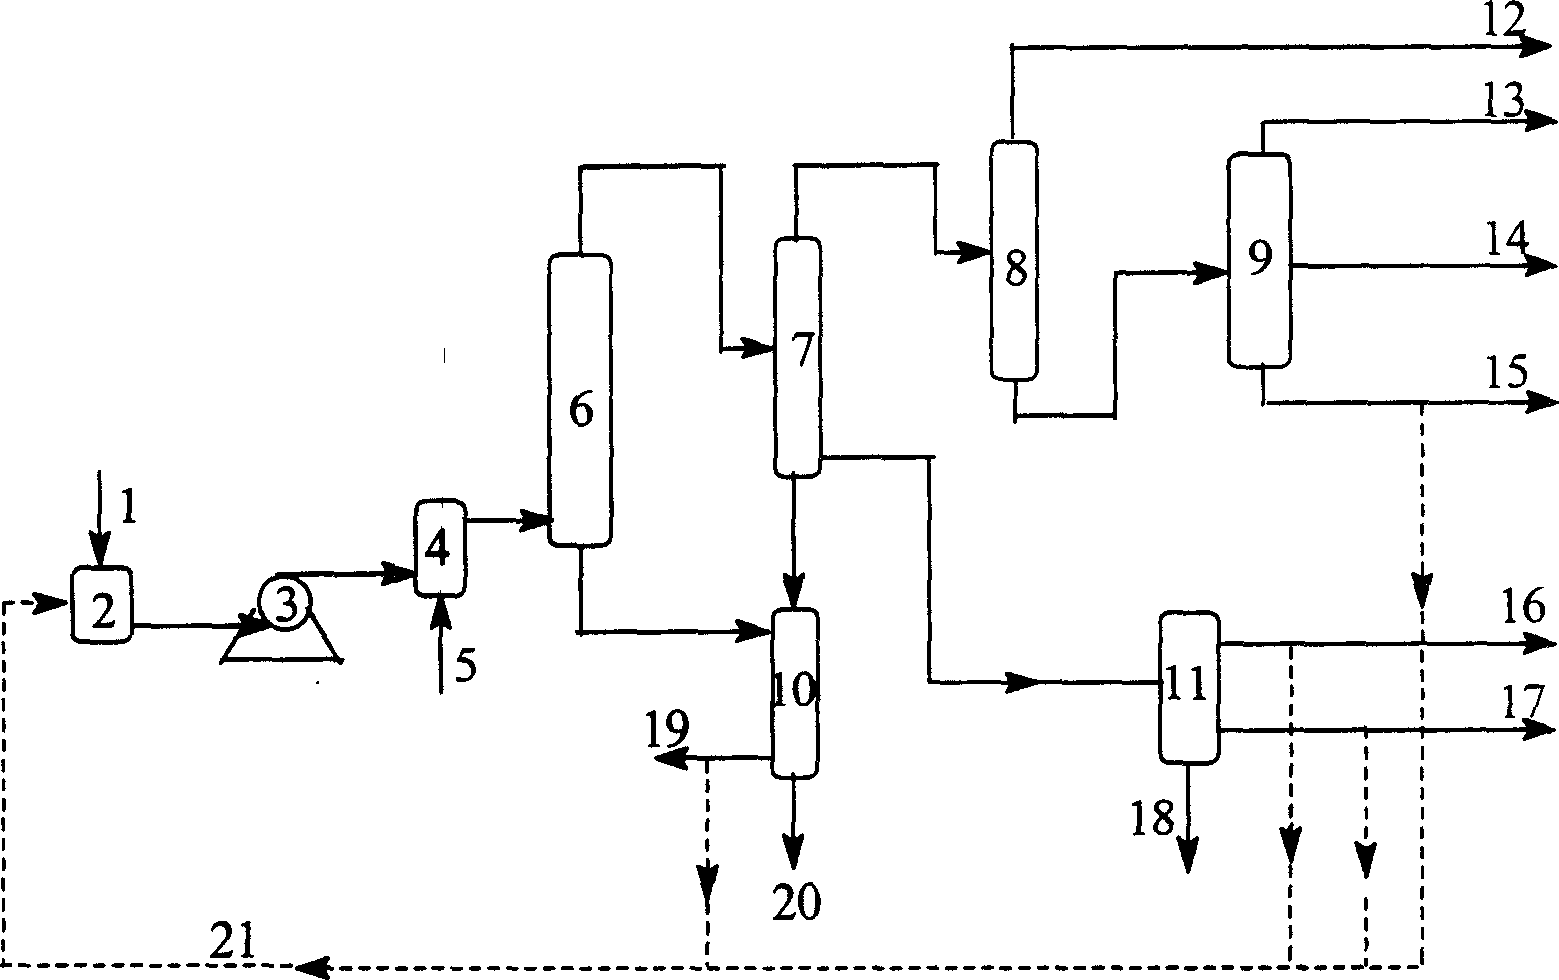 Process for hydrocracking of Fischer-Tropsch synthesized heavy hydrocarbon and/or kettle bottom wax